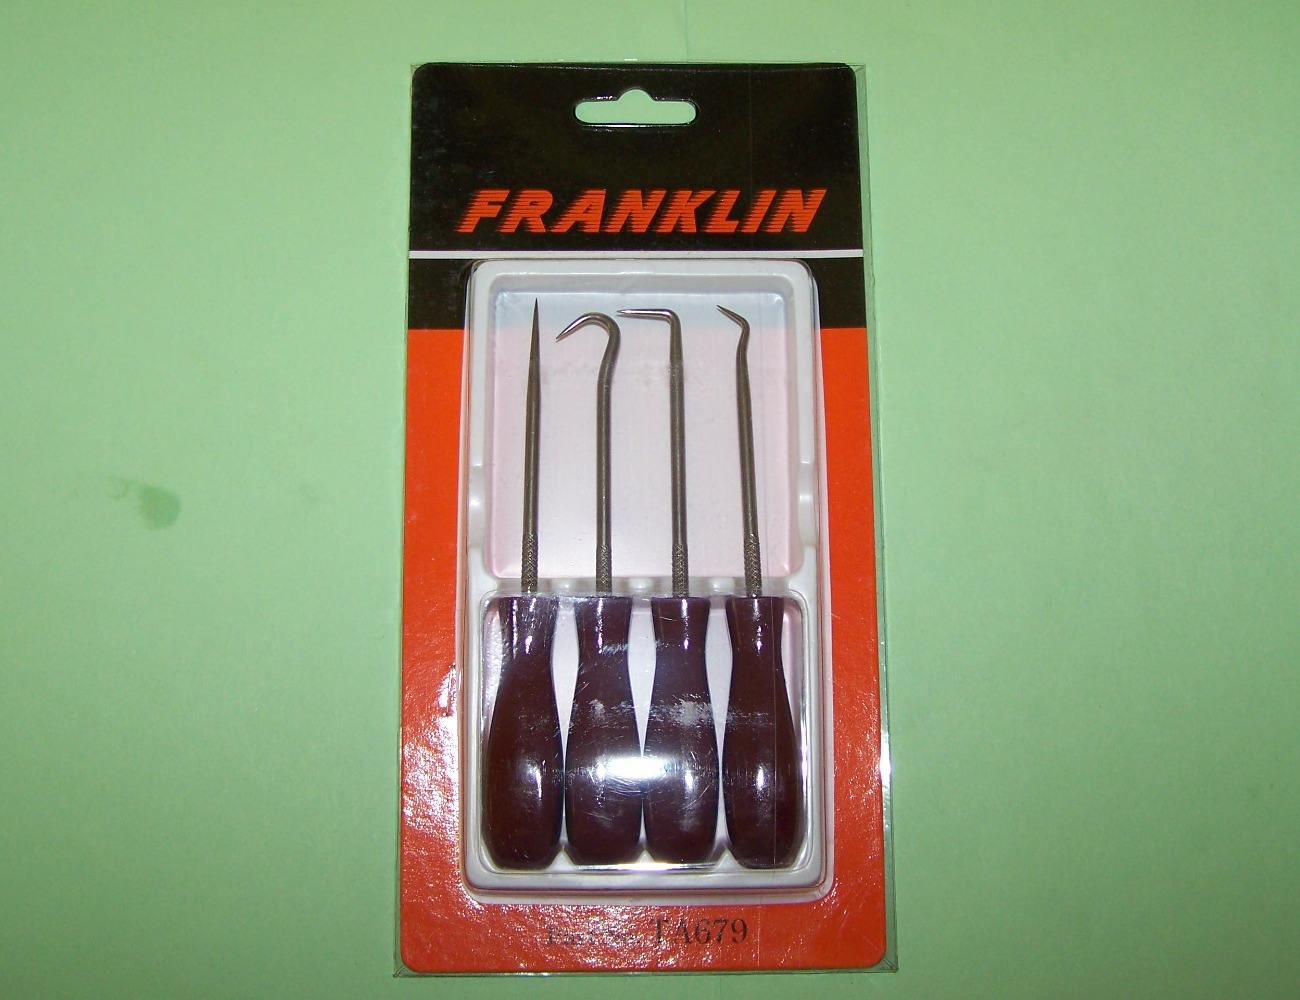 Hook and Pickup Set.  Ideal for removing and fitting O-rings, cotter pins, seals and bushes.  4 piece set